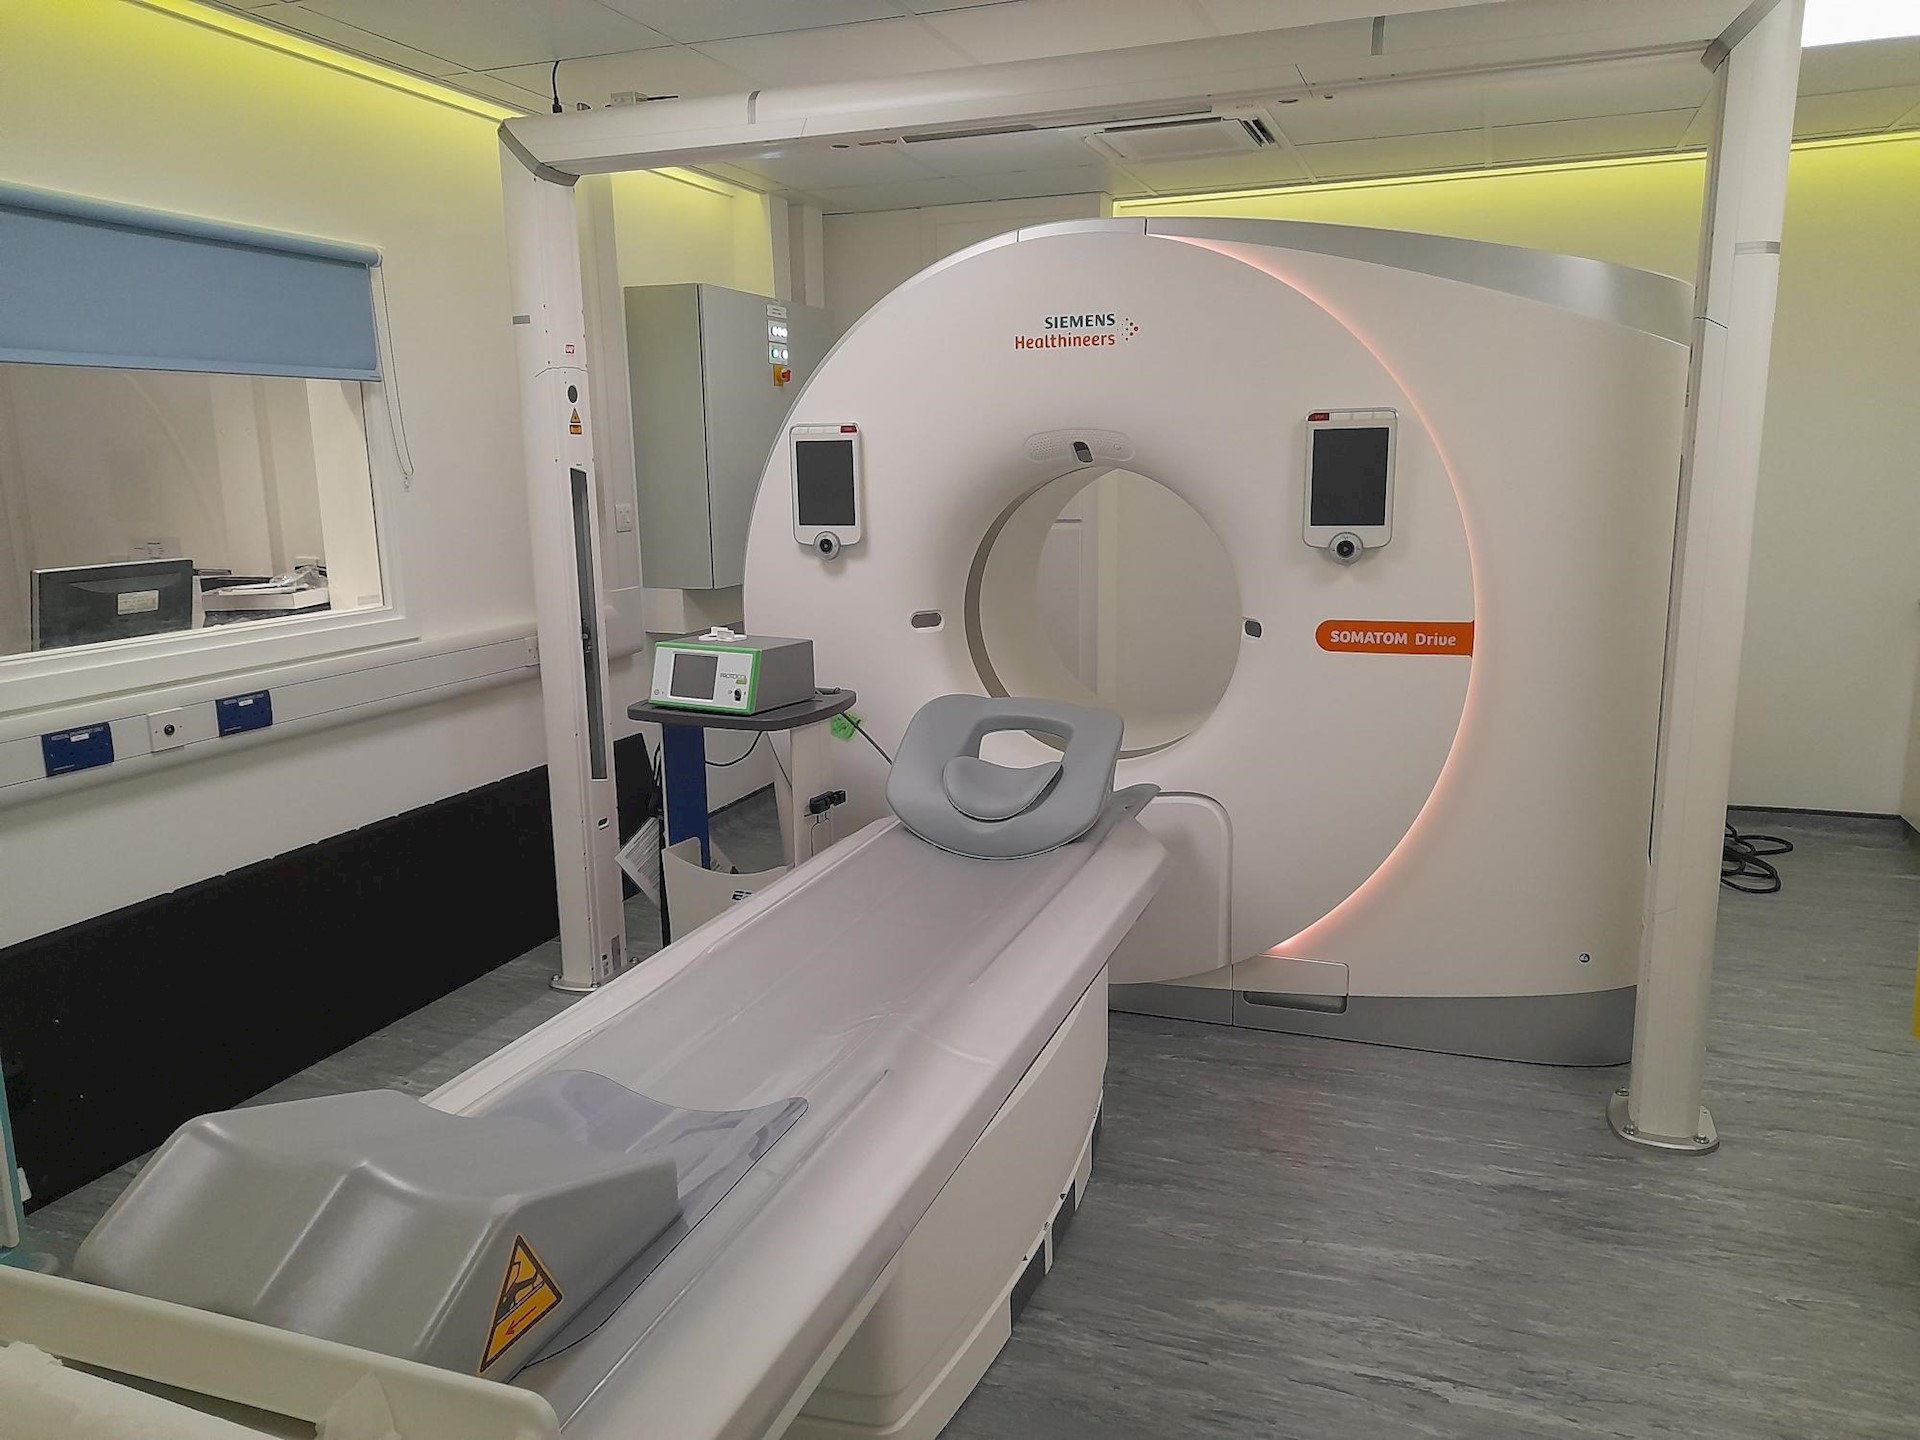 Spire Southampton Hospital invests £1.5 million in new CT scanner, bringing faster diagnoses for cancer patients